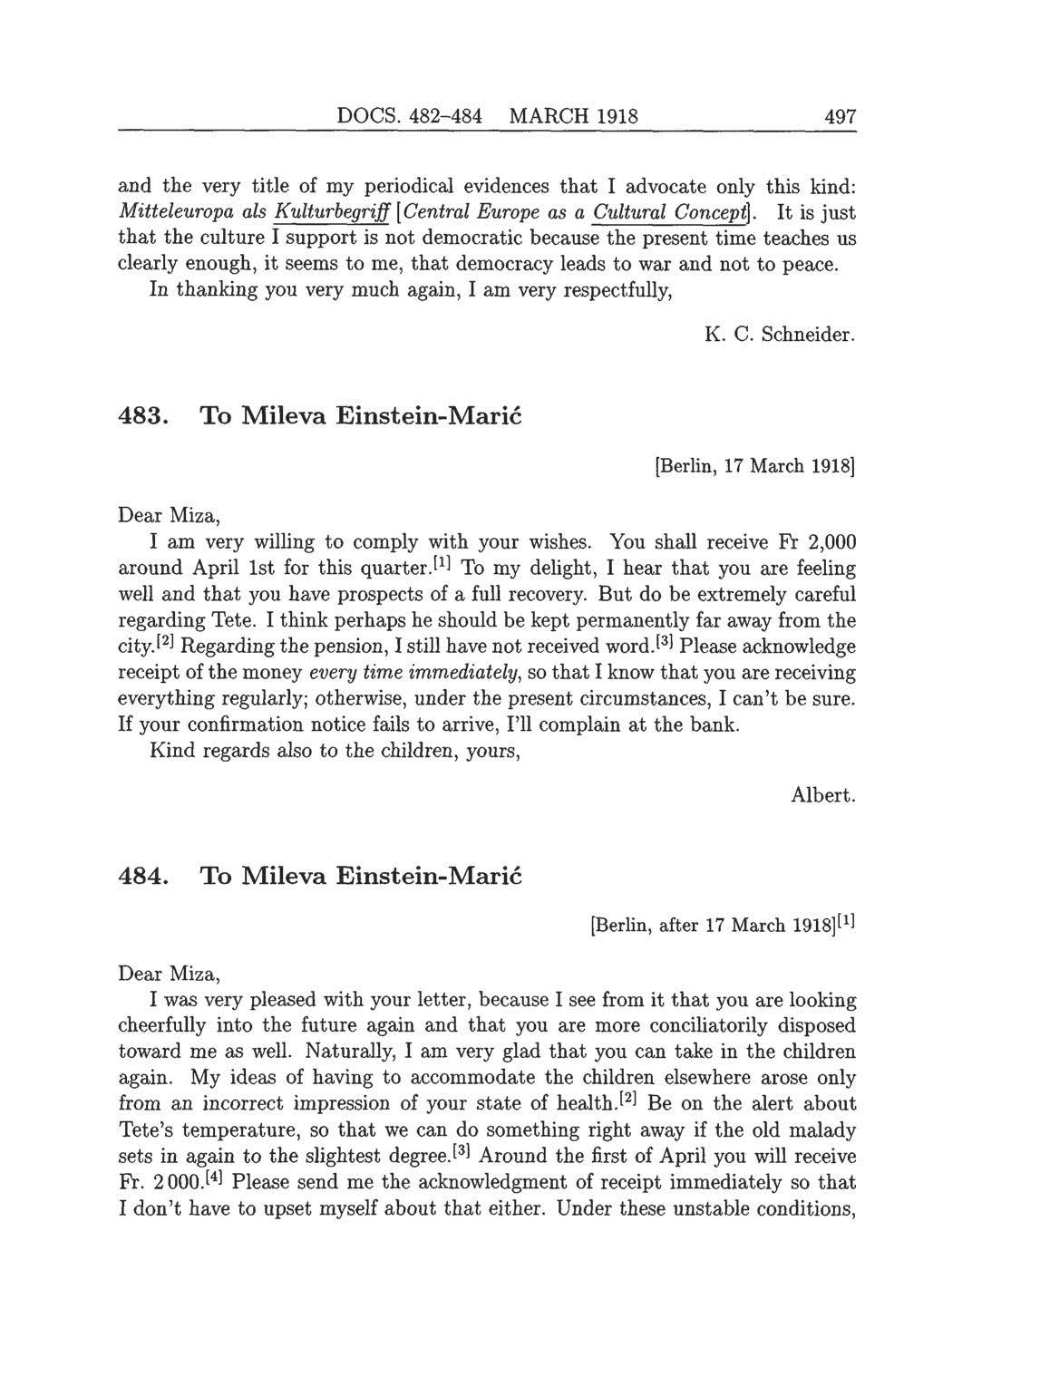 Volume 8: The Berlin Years: Correspondence, 1914-1918 (English translation supplement) page 497